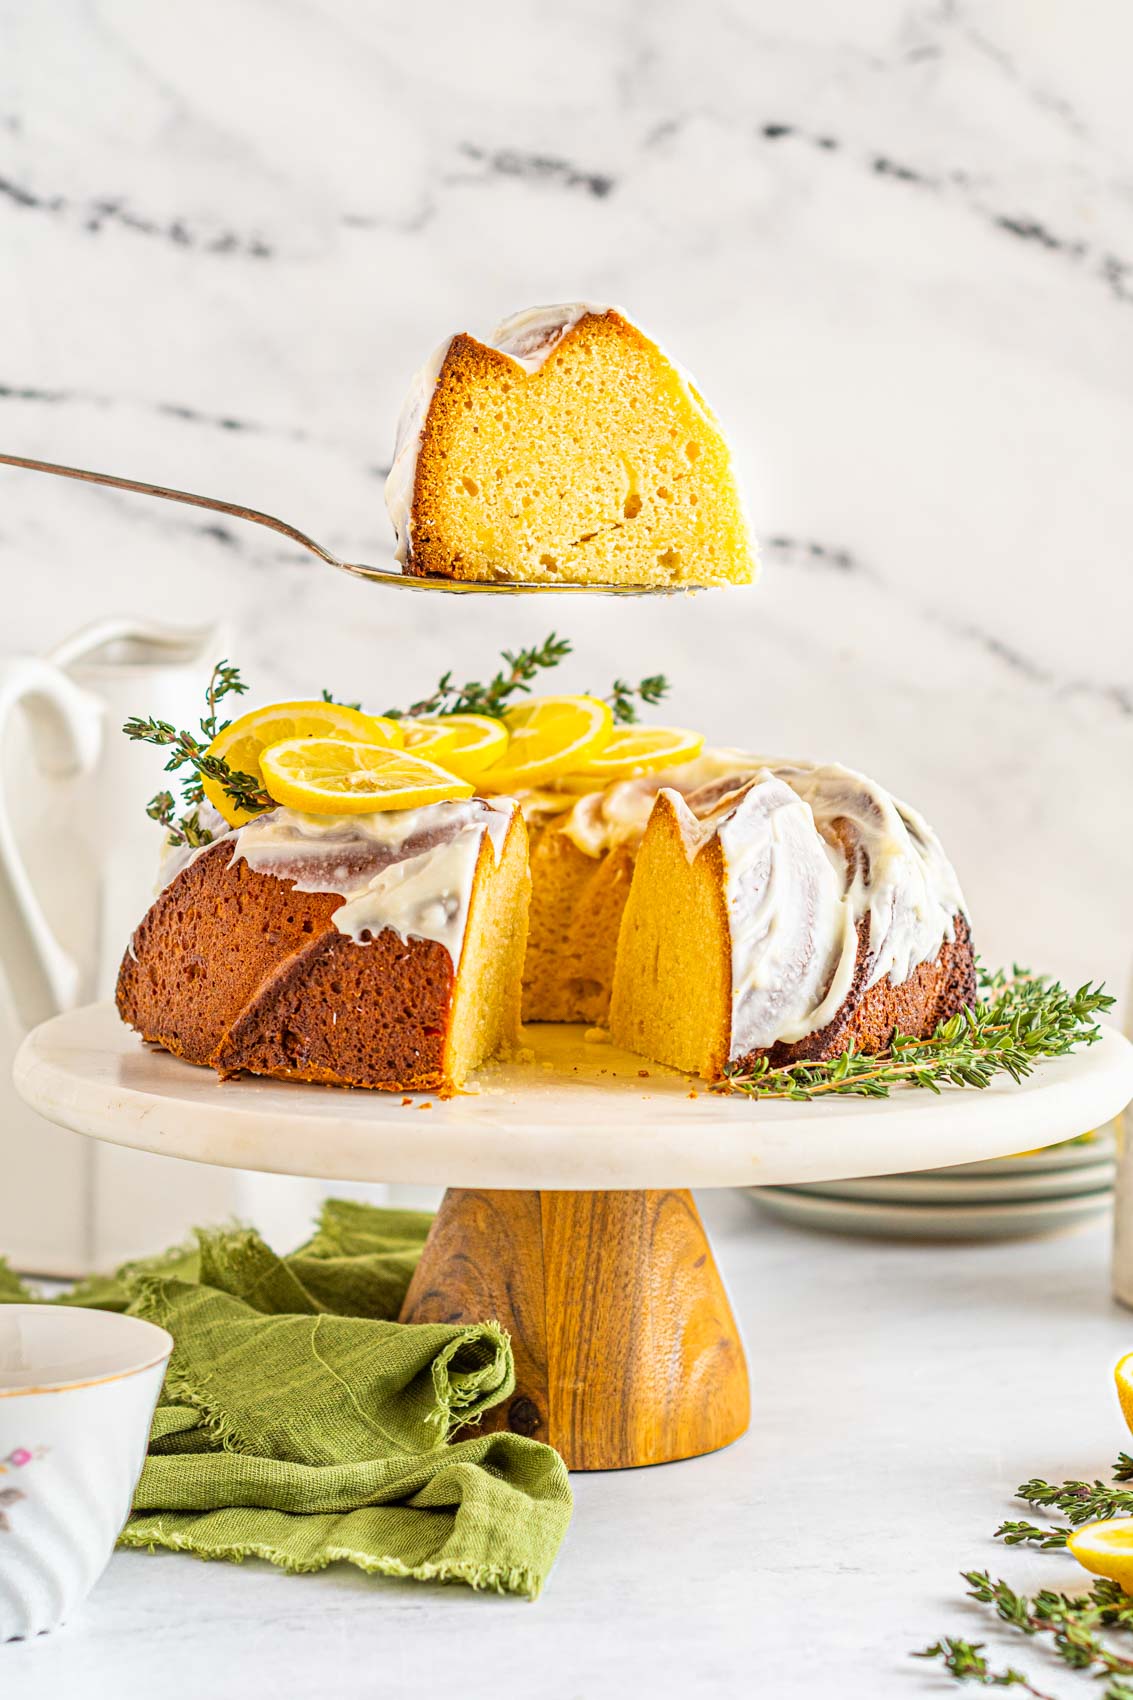 spatula lifting a piece of lemon bundt cake from the cake stand with a green towel on table